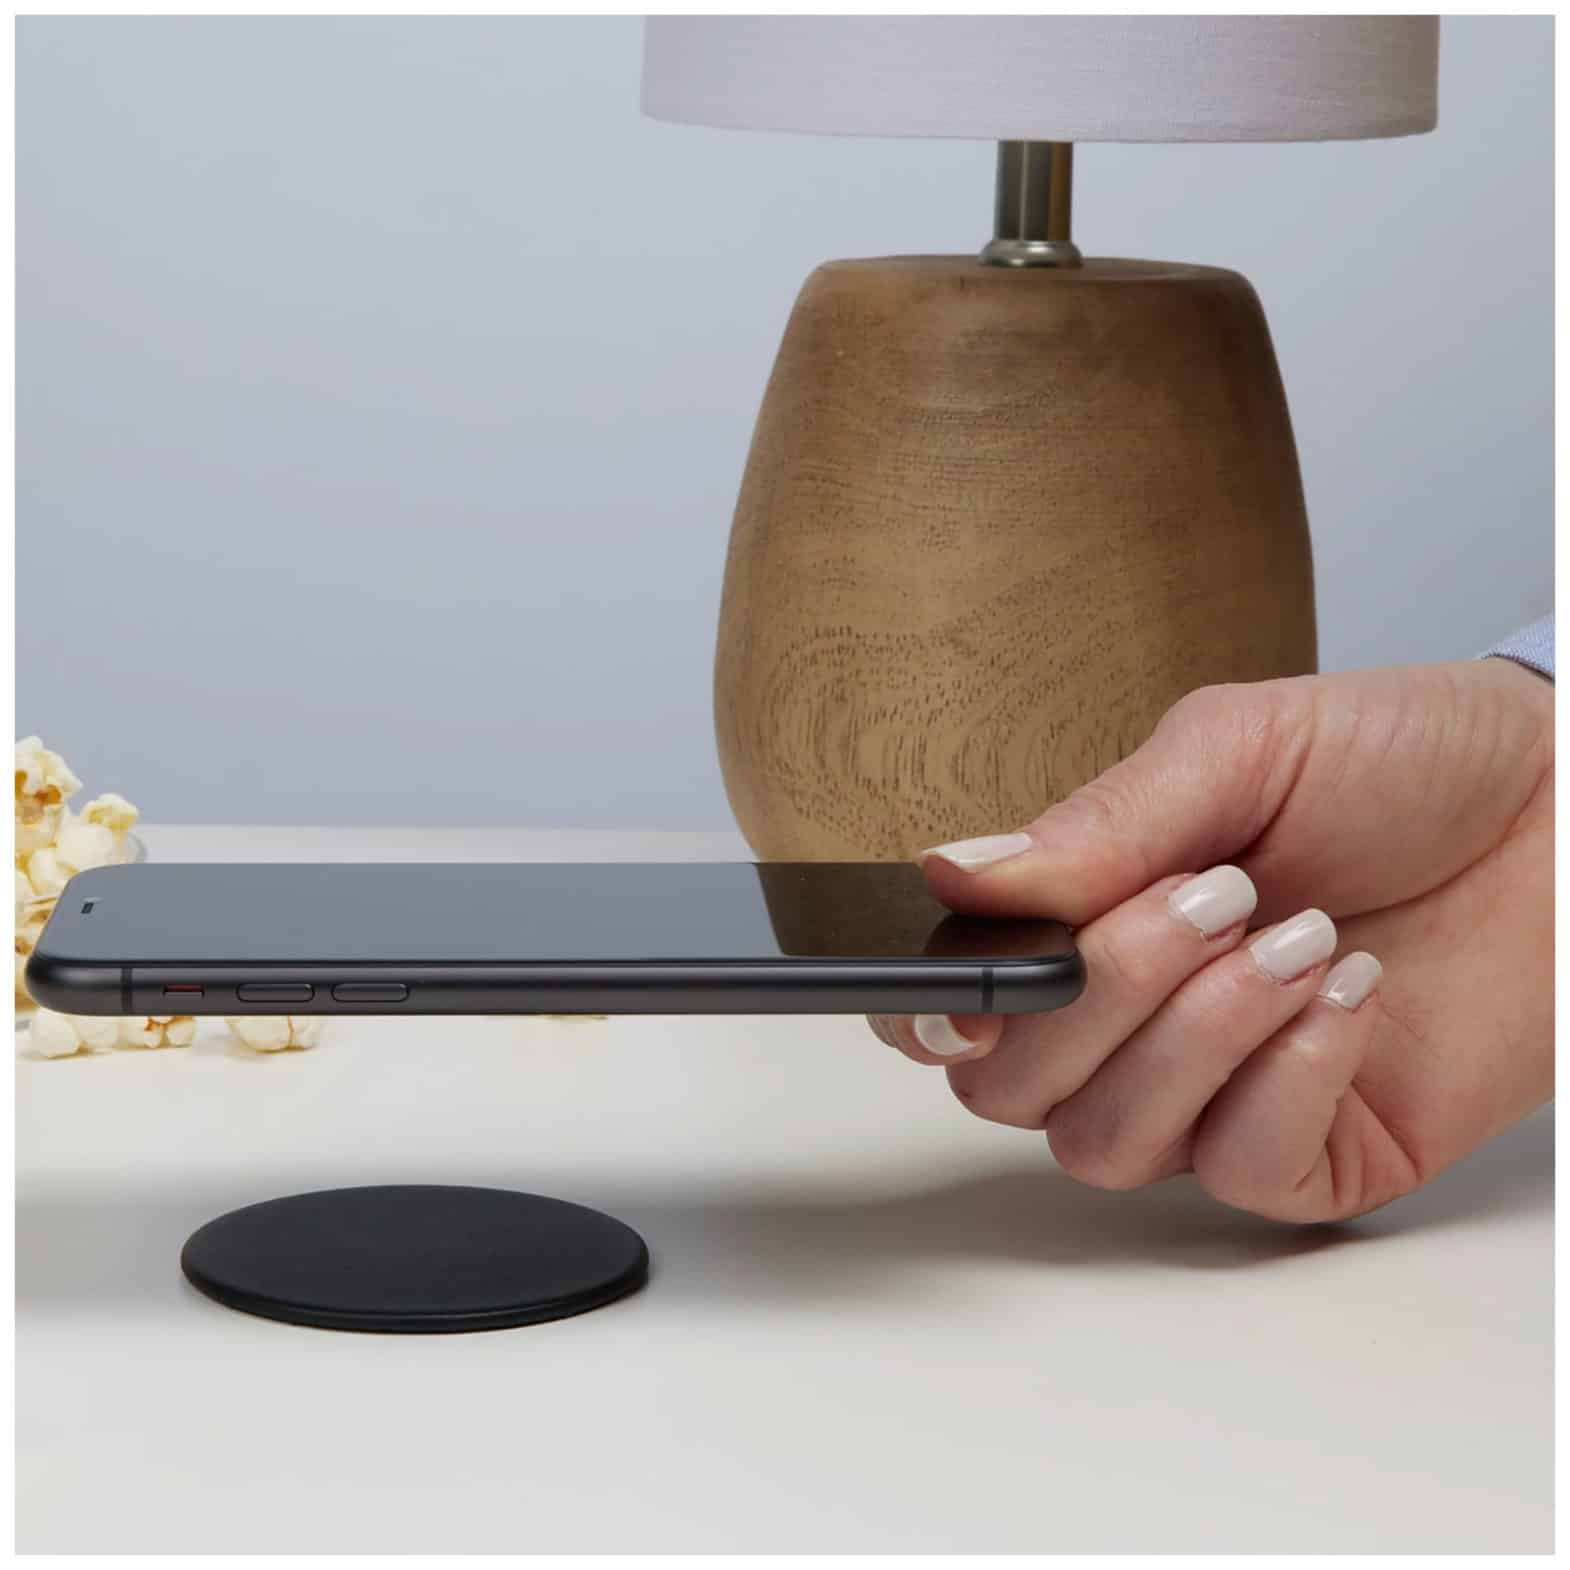 A Qi-compatible wireless charging pad that can charge a variety of devices, including smartphones, tablets, and smartwatches